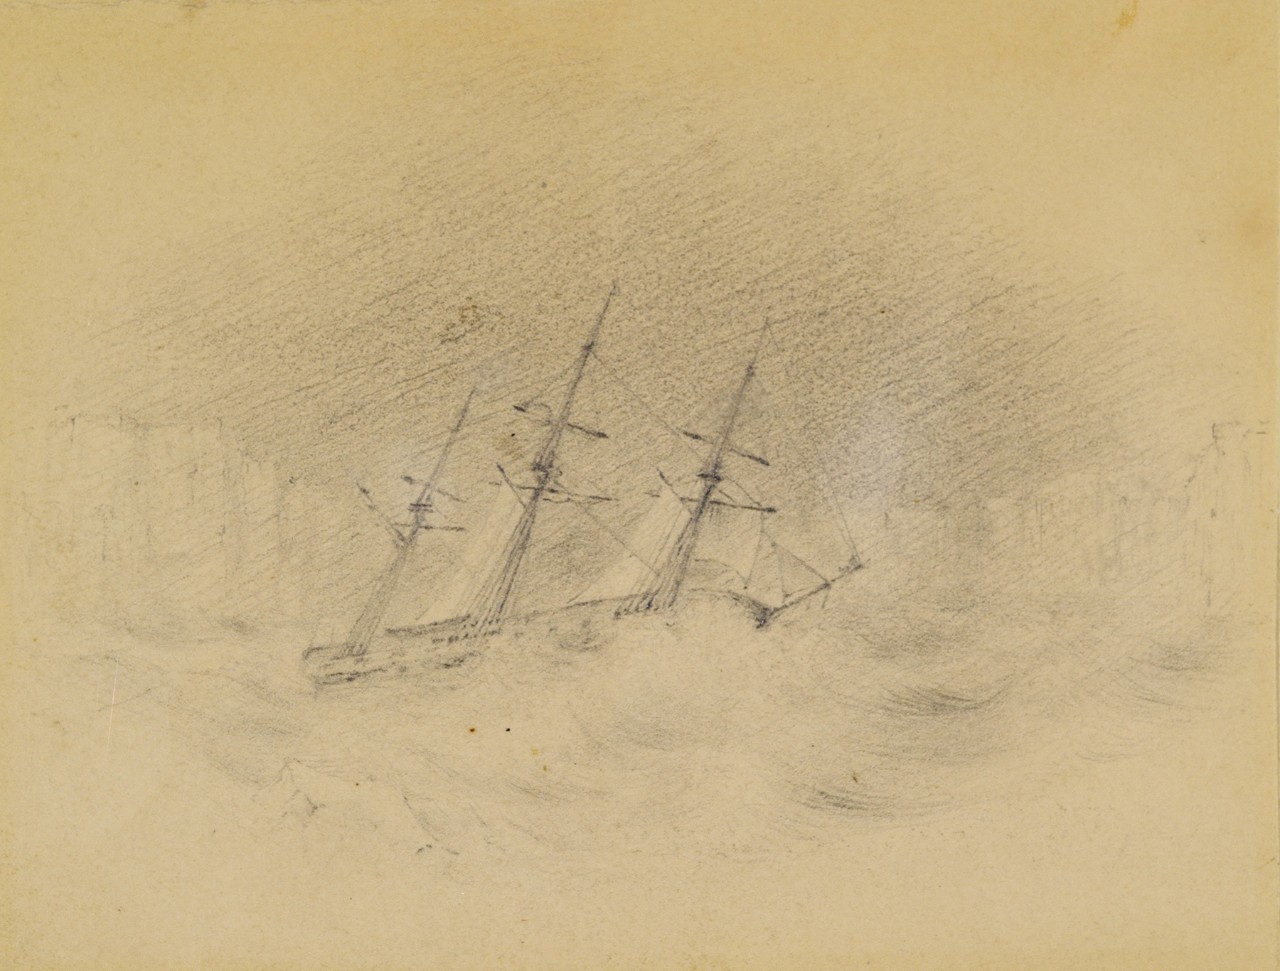 A ship in rough seas with an ice shelf in the background